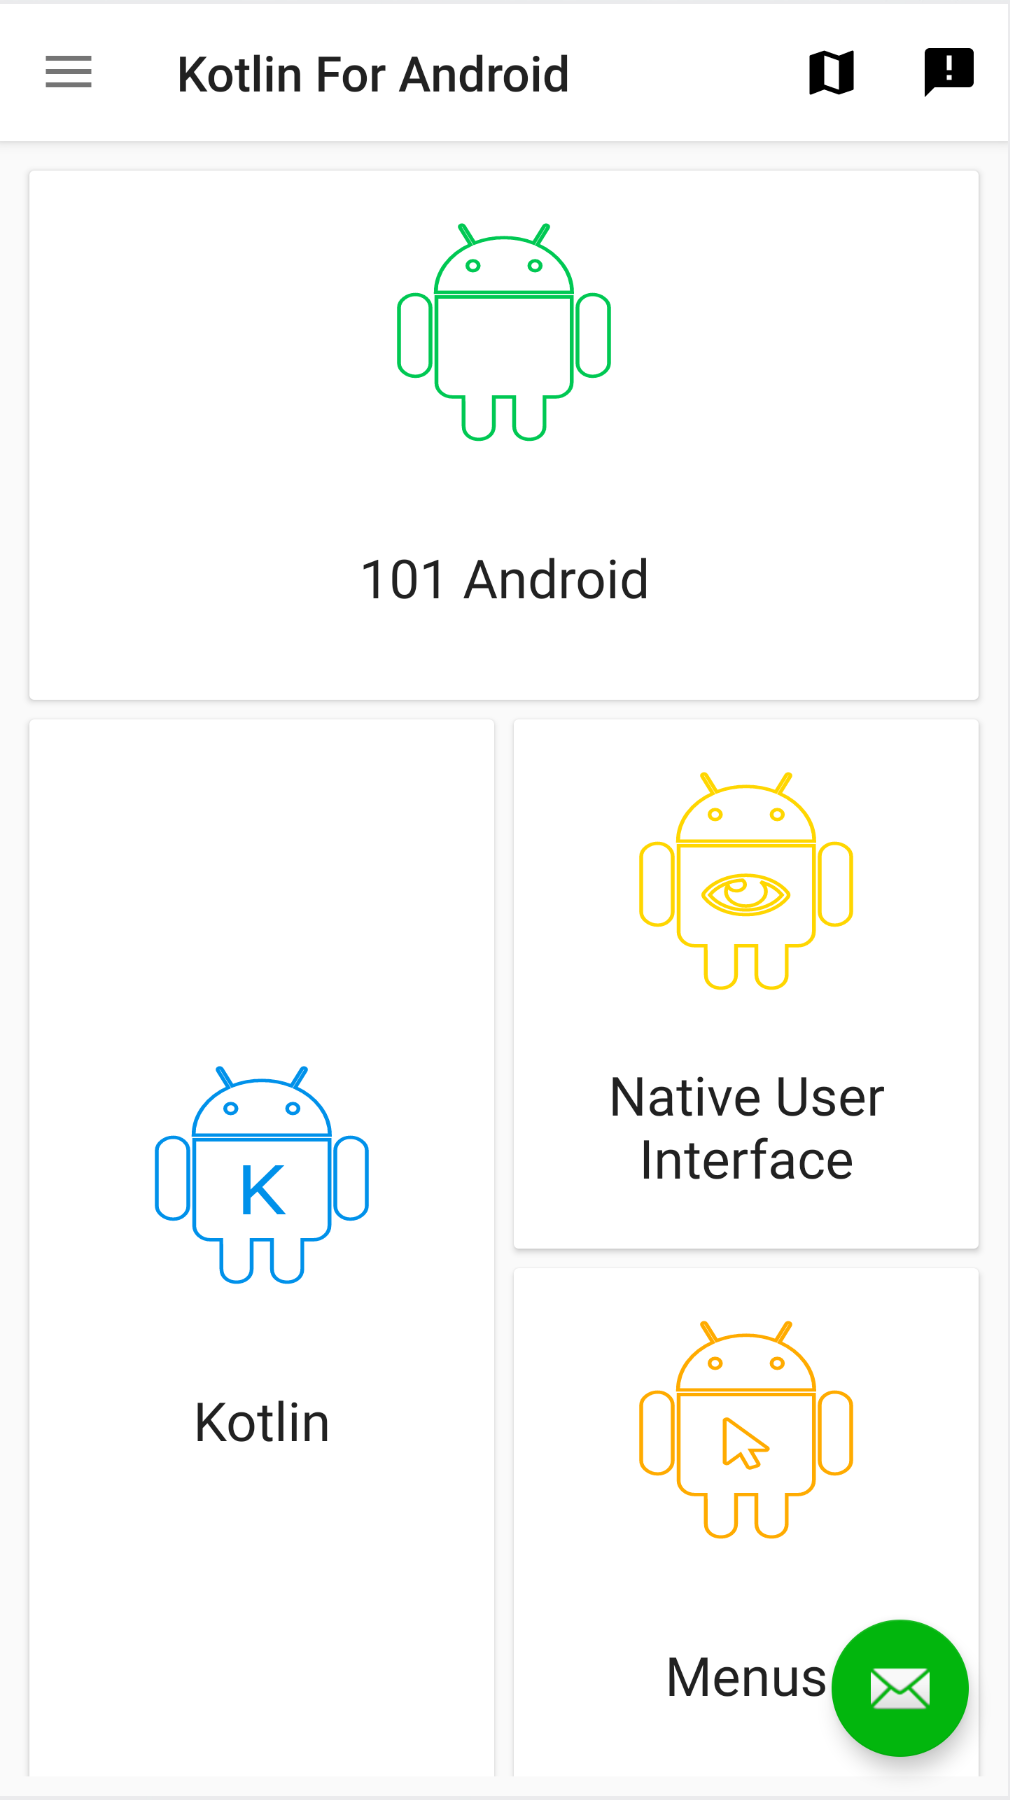 Main screen of Kotlin for Android app